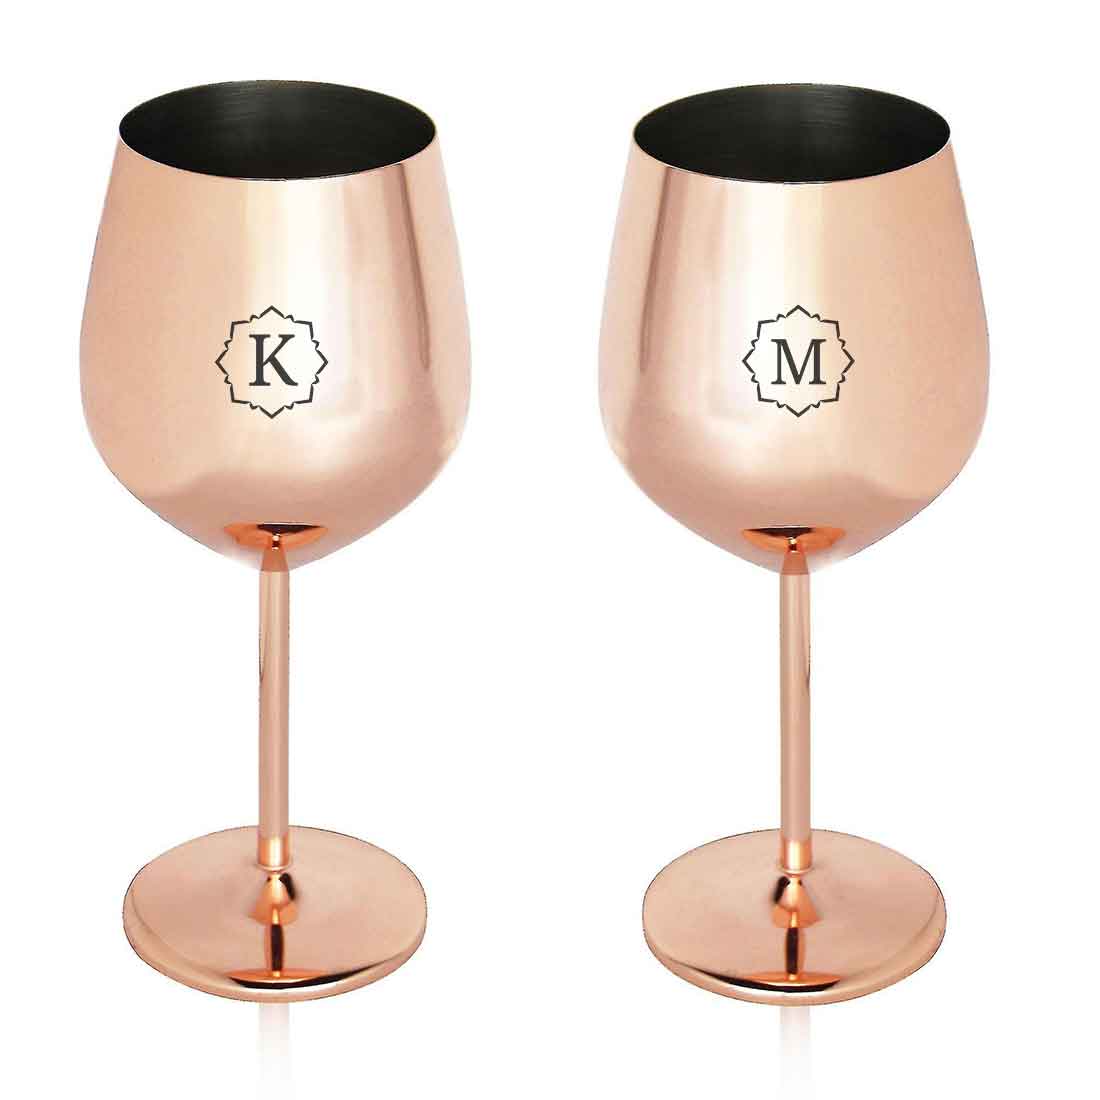 Customized Unbreakable Wine Glasses Stainless